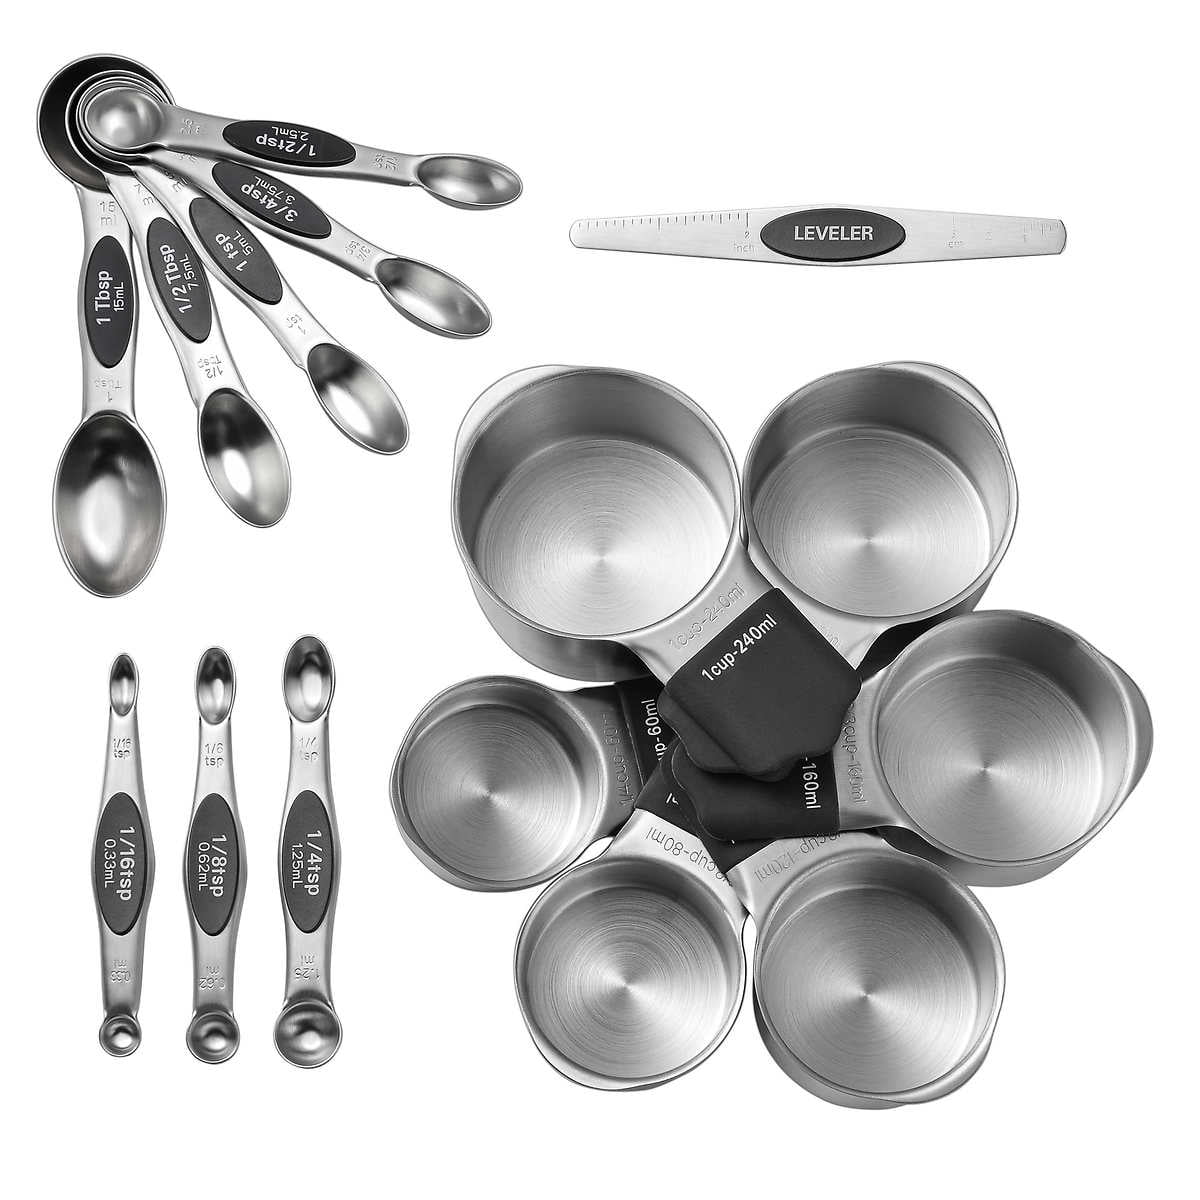 Naitesen 13PCS Measuring Cups and Magnetic Measuring Spoons Set with  Leveler, Stainless Steel Dishwasher Safe, Nesting Metal Spoons Cups for  Cooking